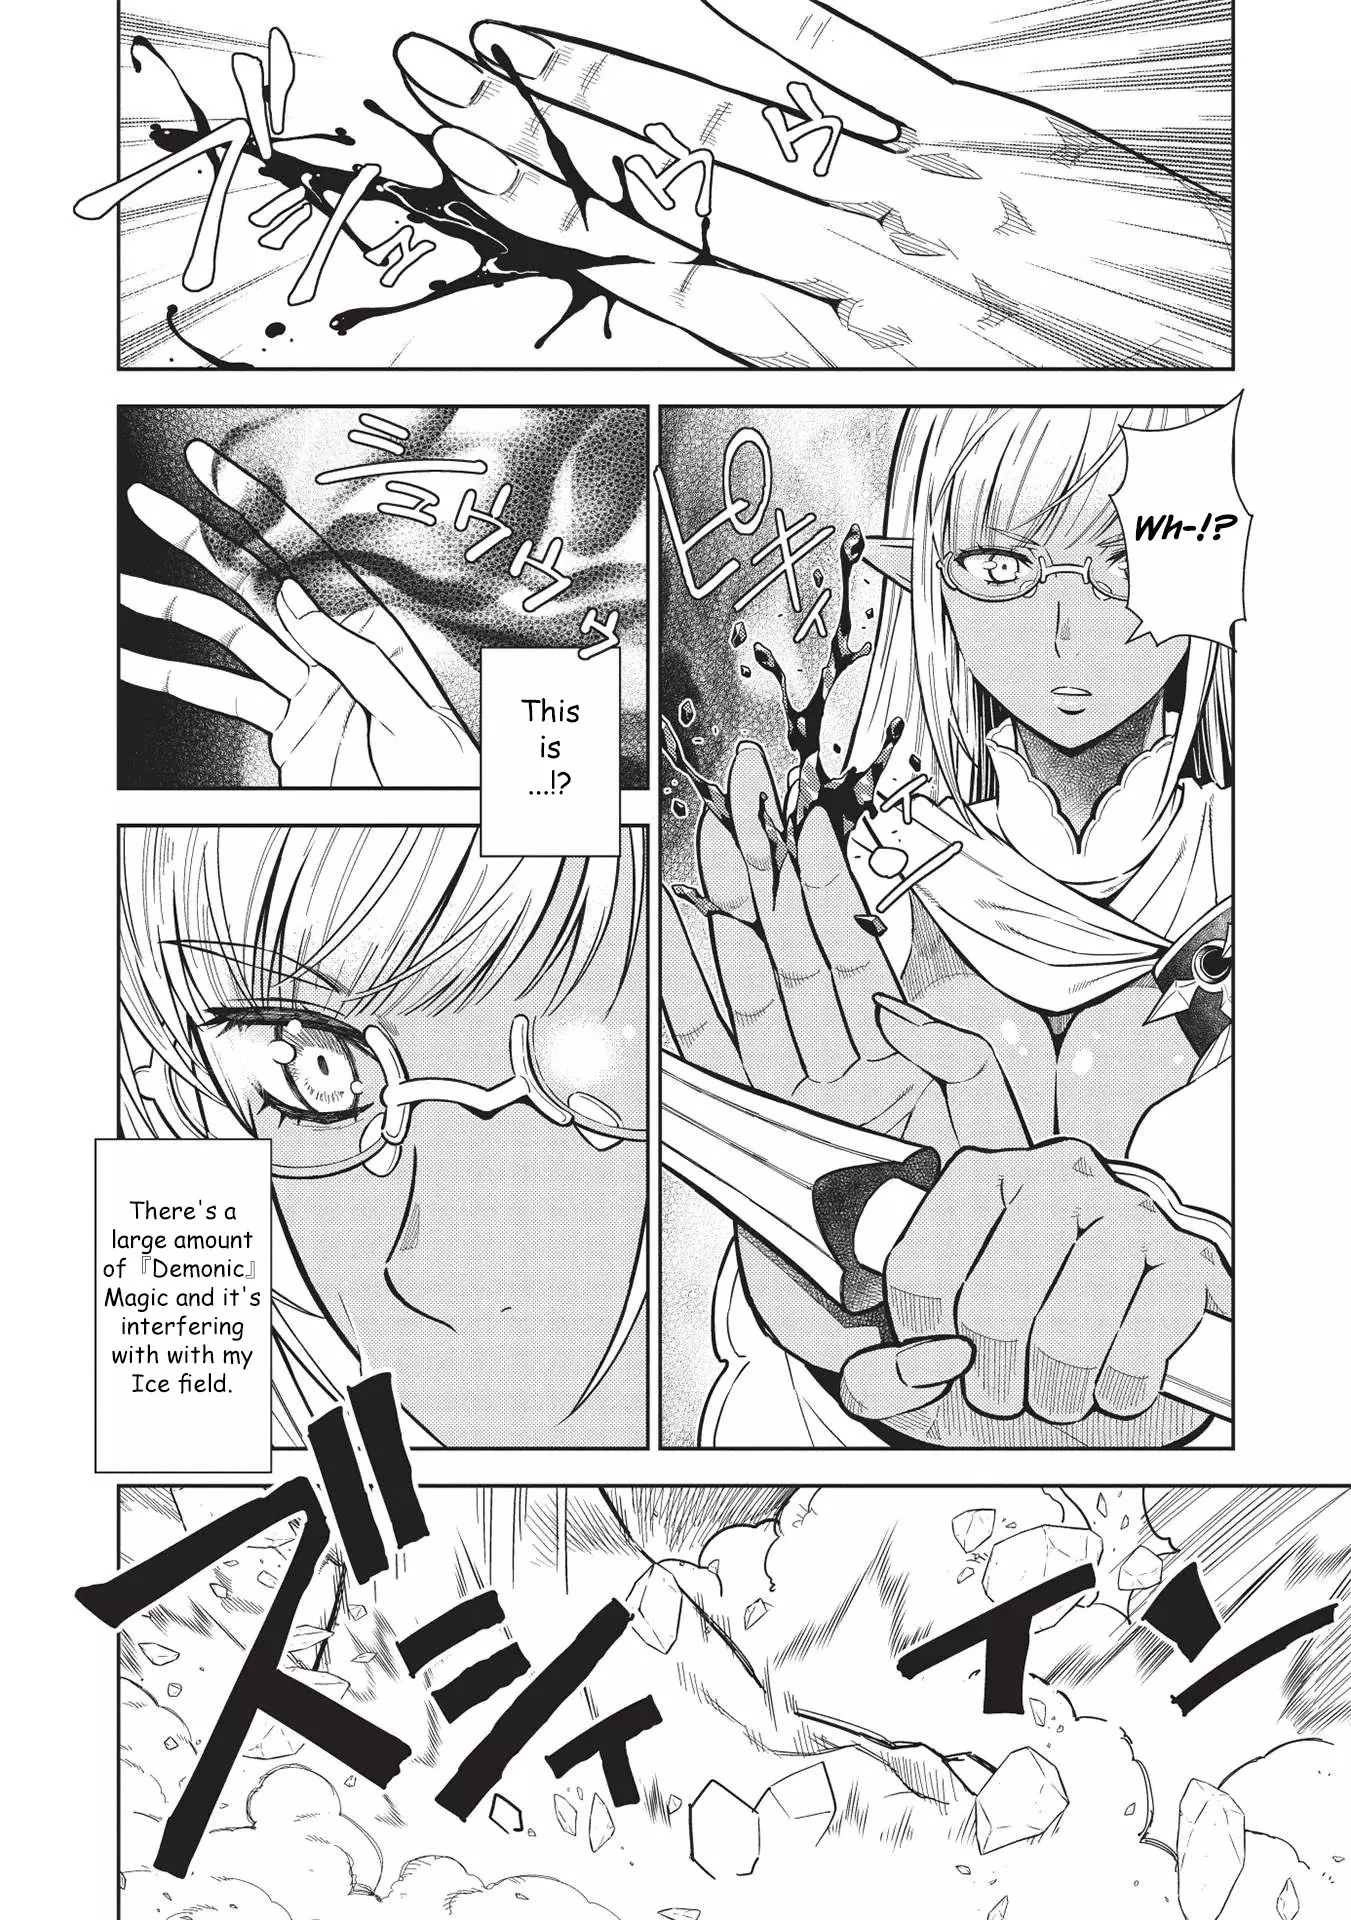 Break Through in Another World With Magical Eyes and Bullets!! - 14.4 page 7-7af3e22b